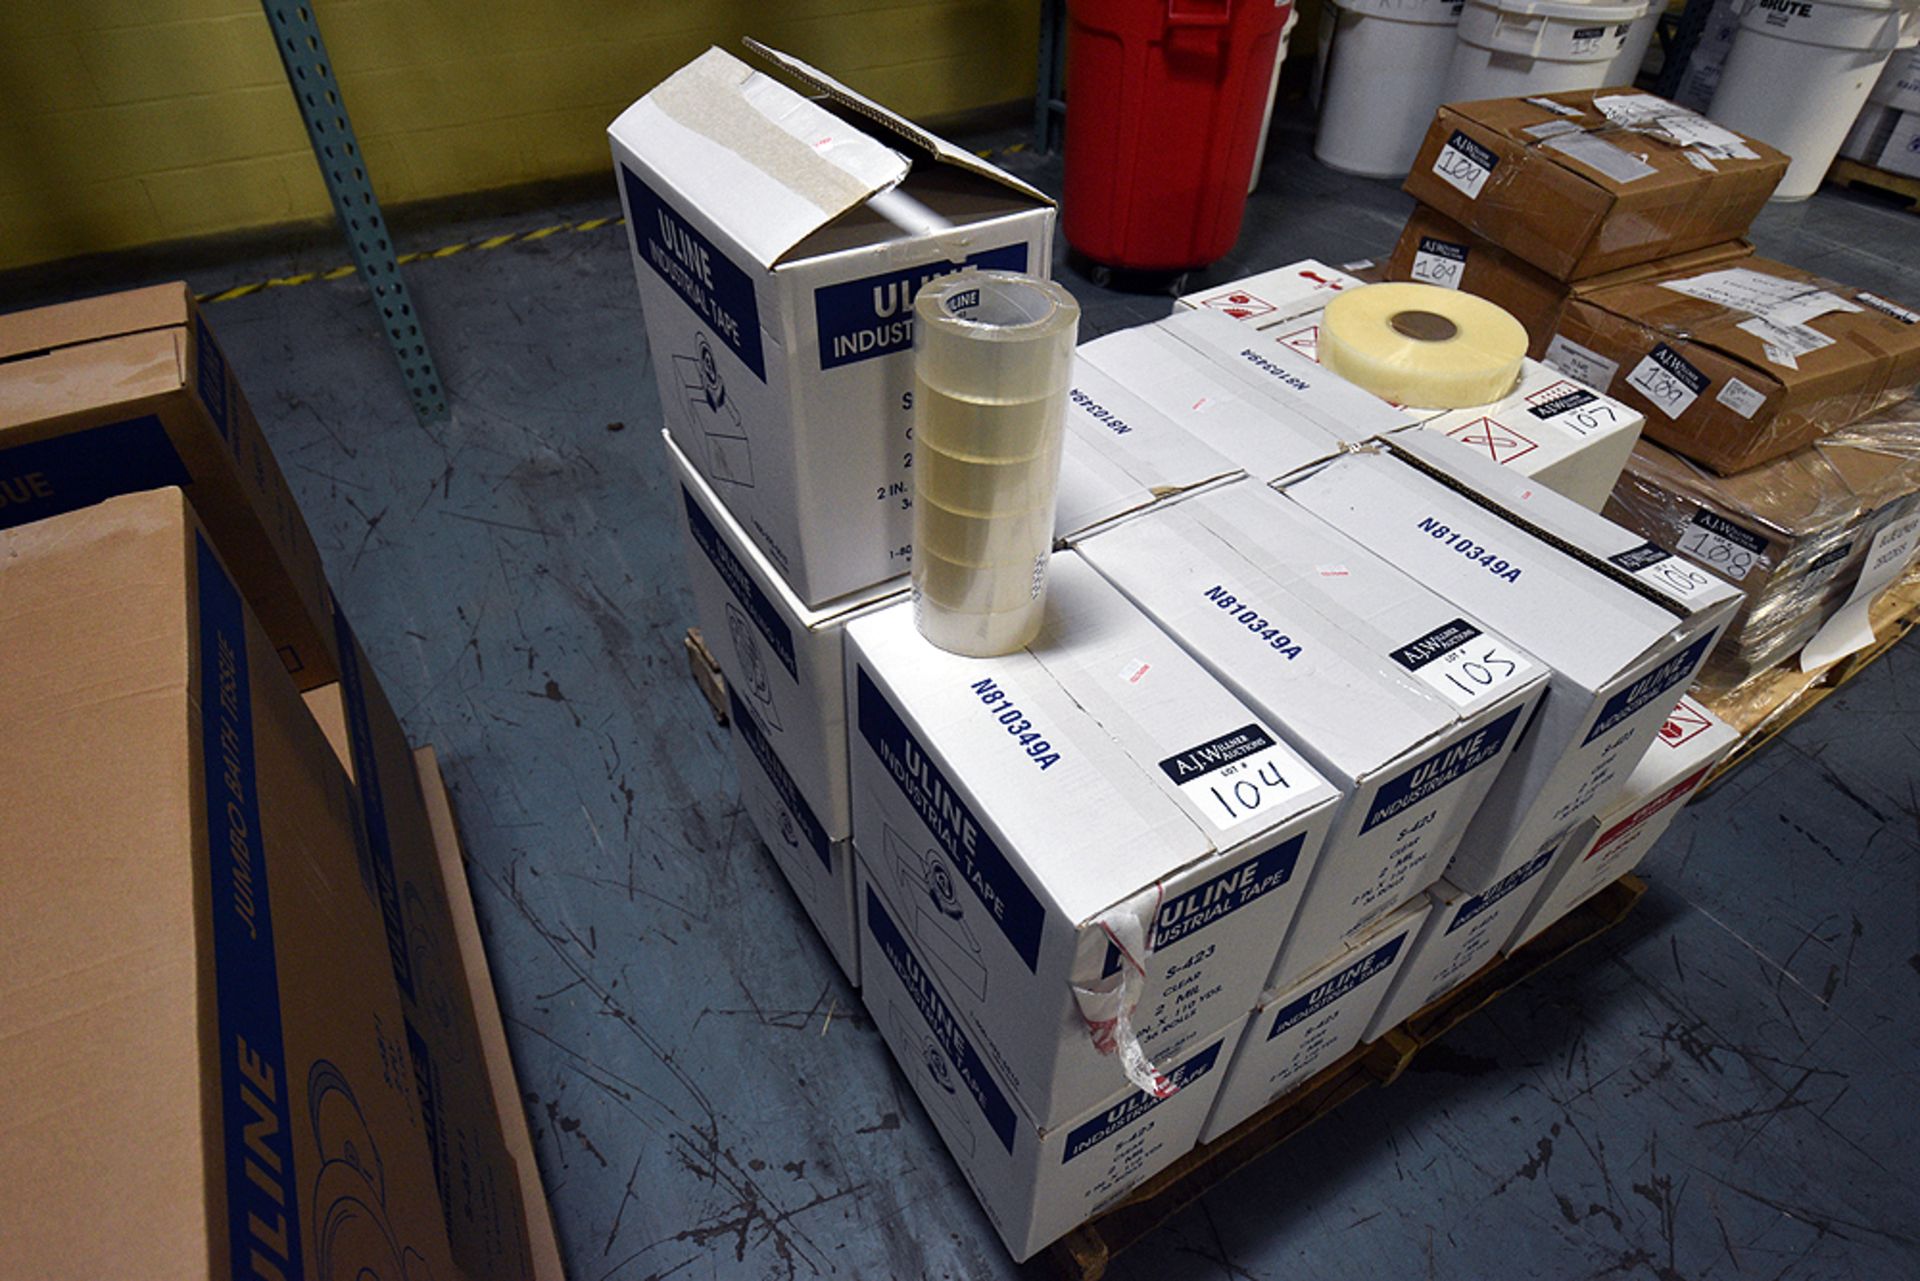 Cases of U-Line S-423 2 Mil Industrial Tape - Image 3 of 3